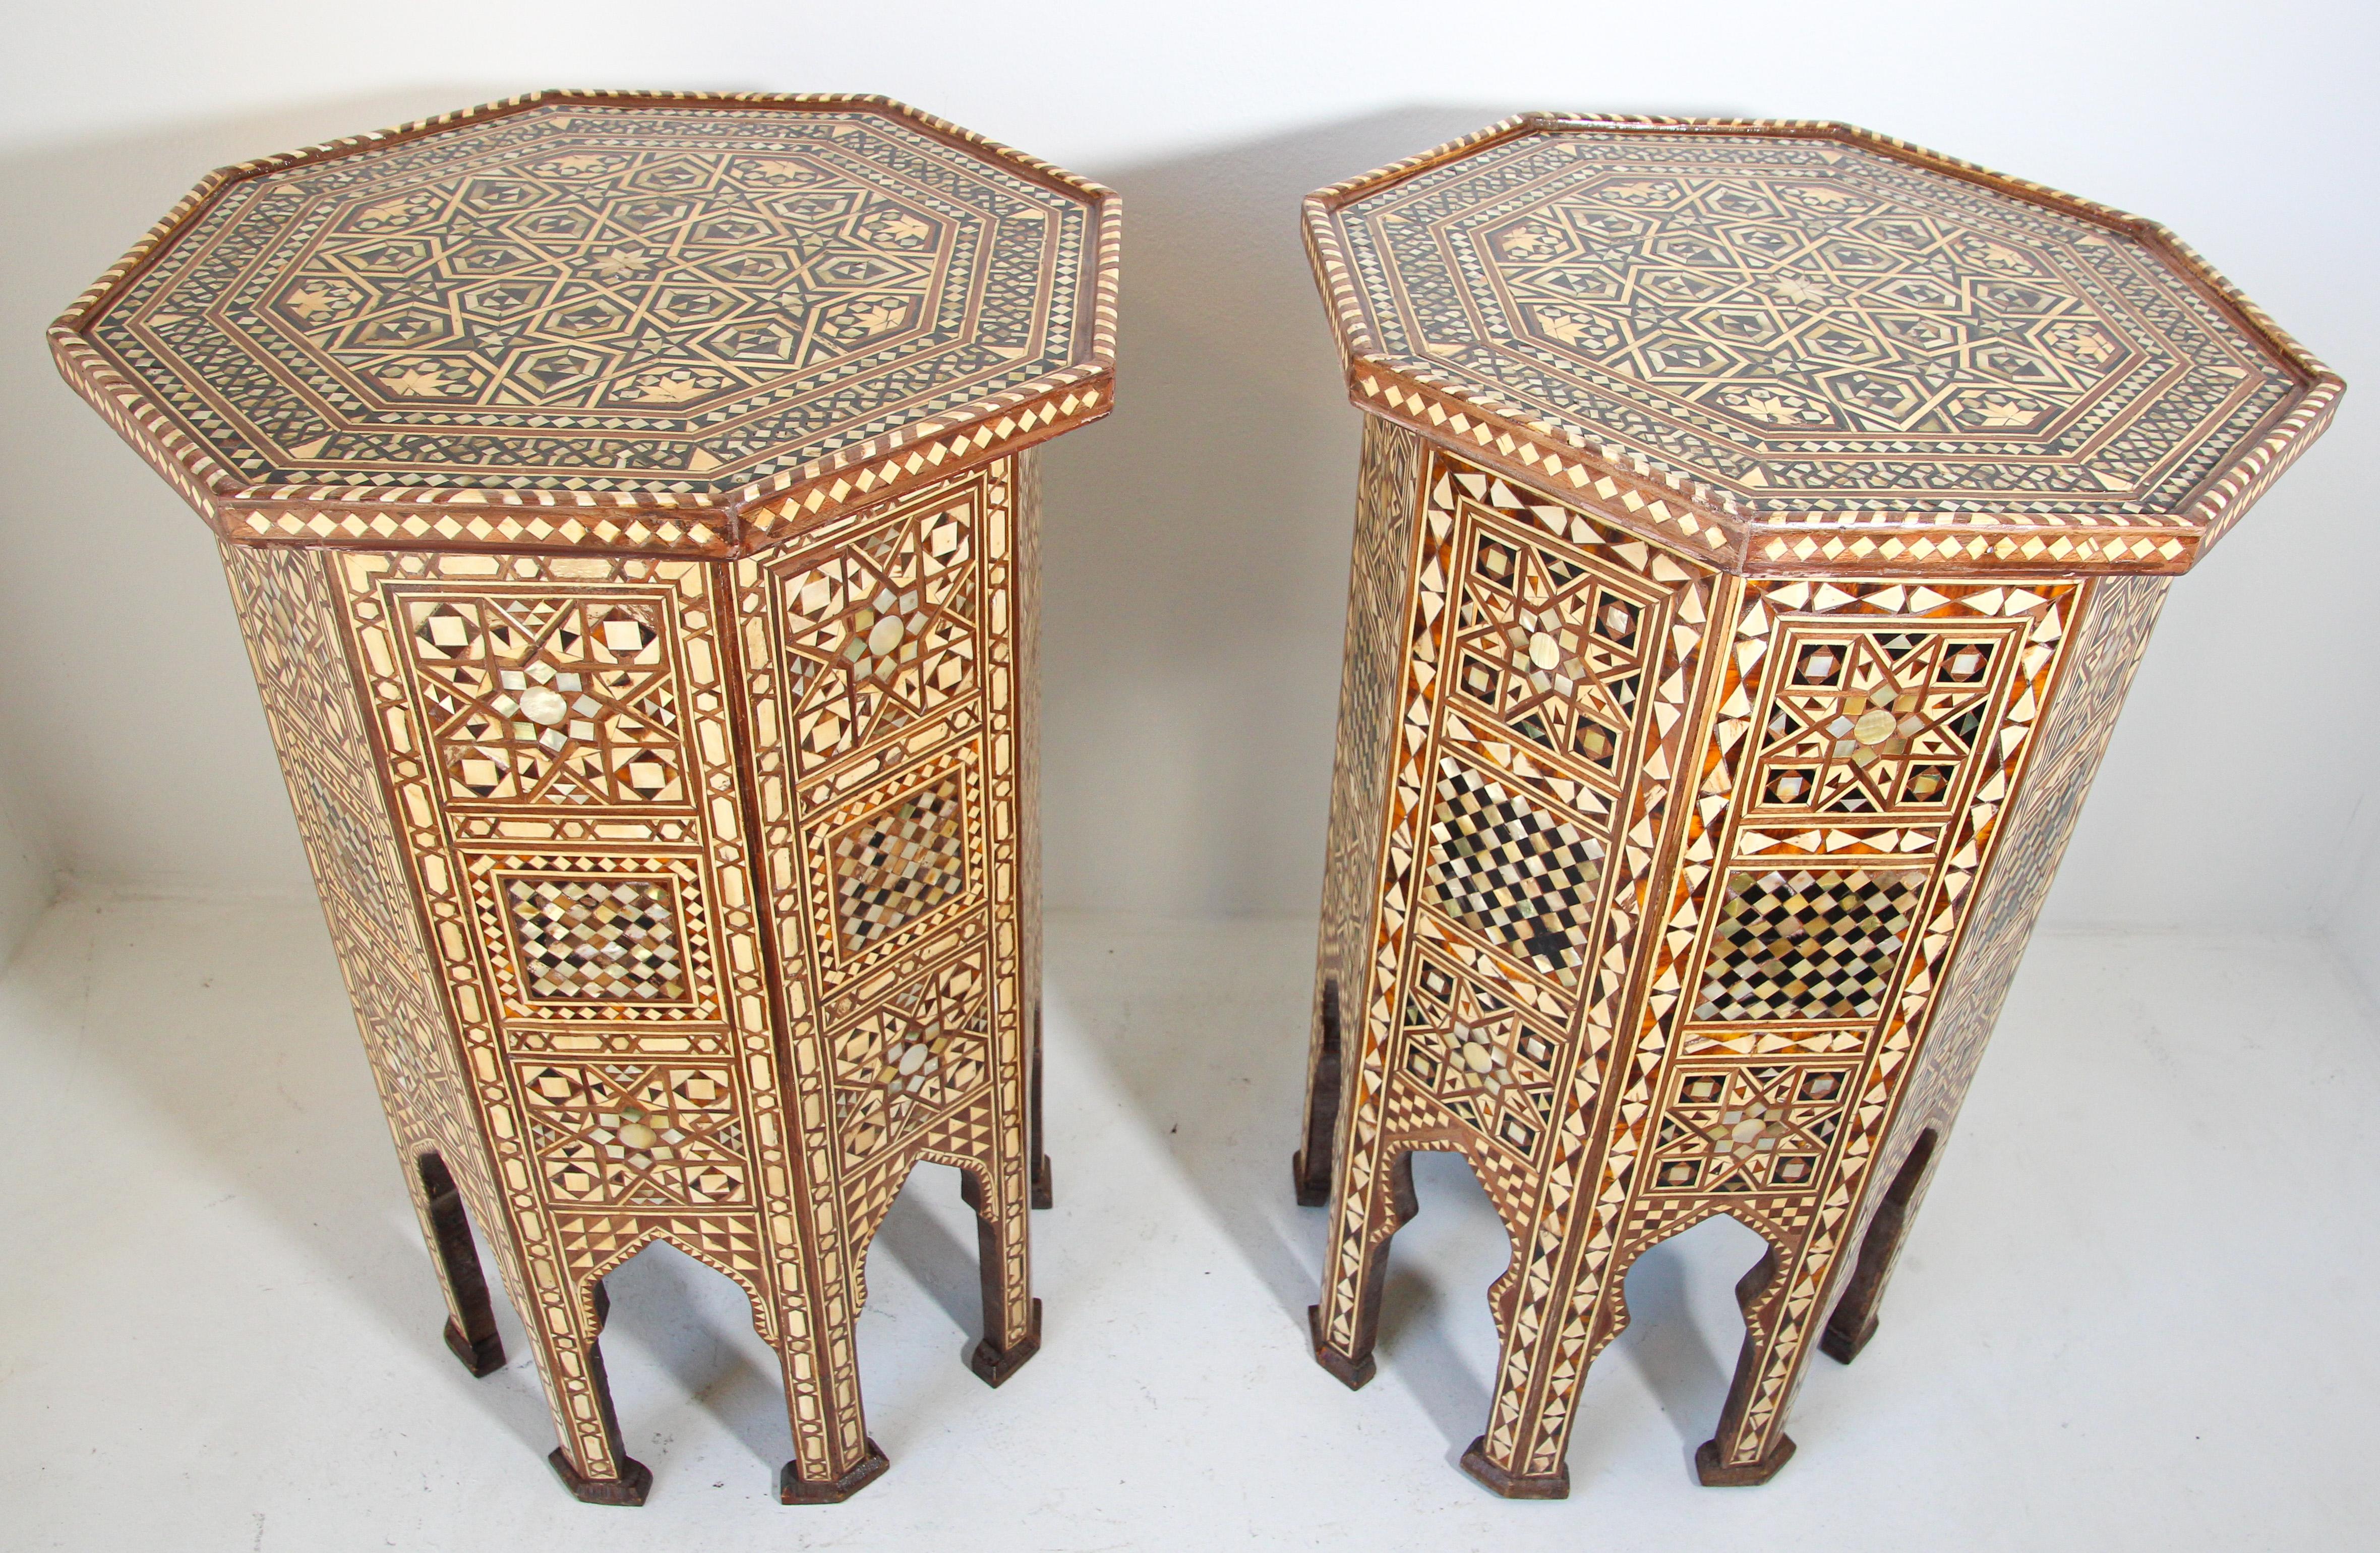 Moorish Moroccan Octagonal Pedestal Tables Inlaid with Mosaic Marquetry For Sale 3